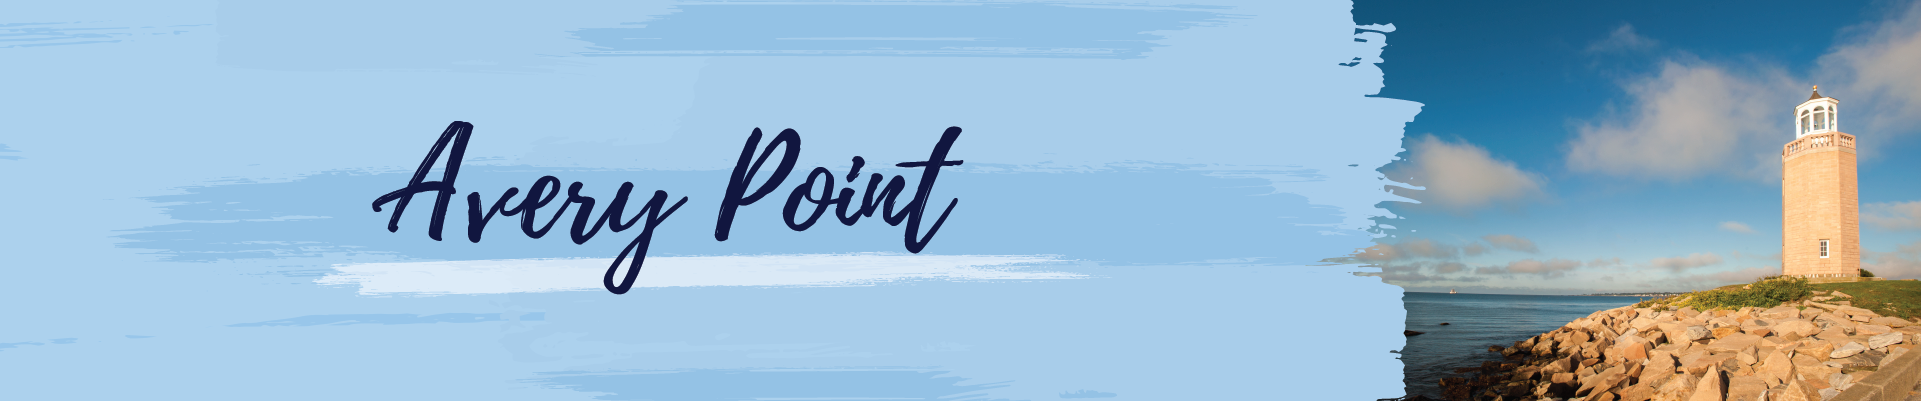 Avery Point banner